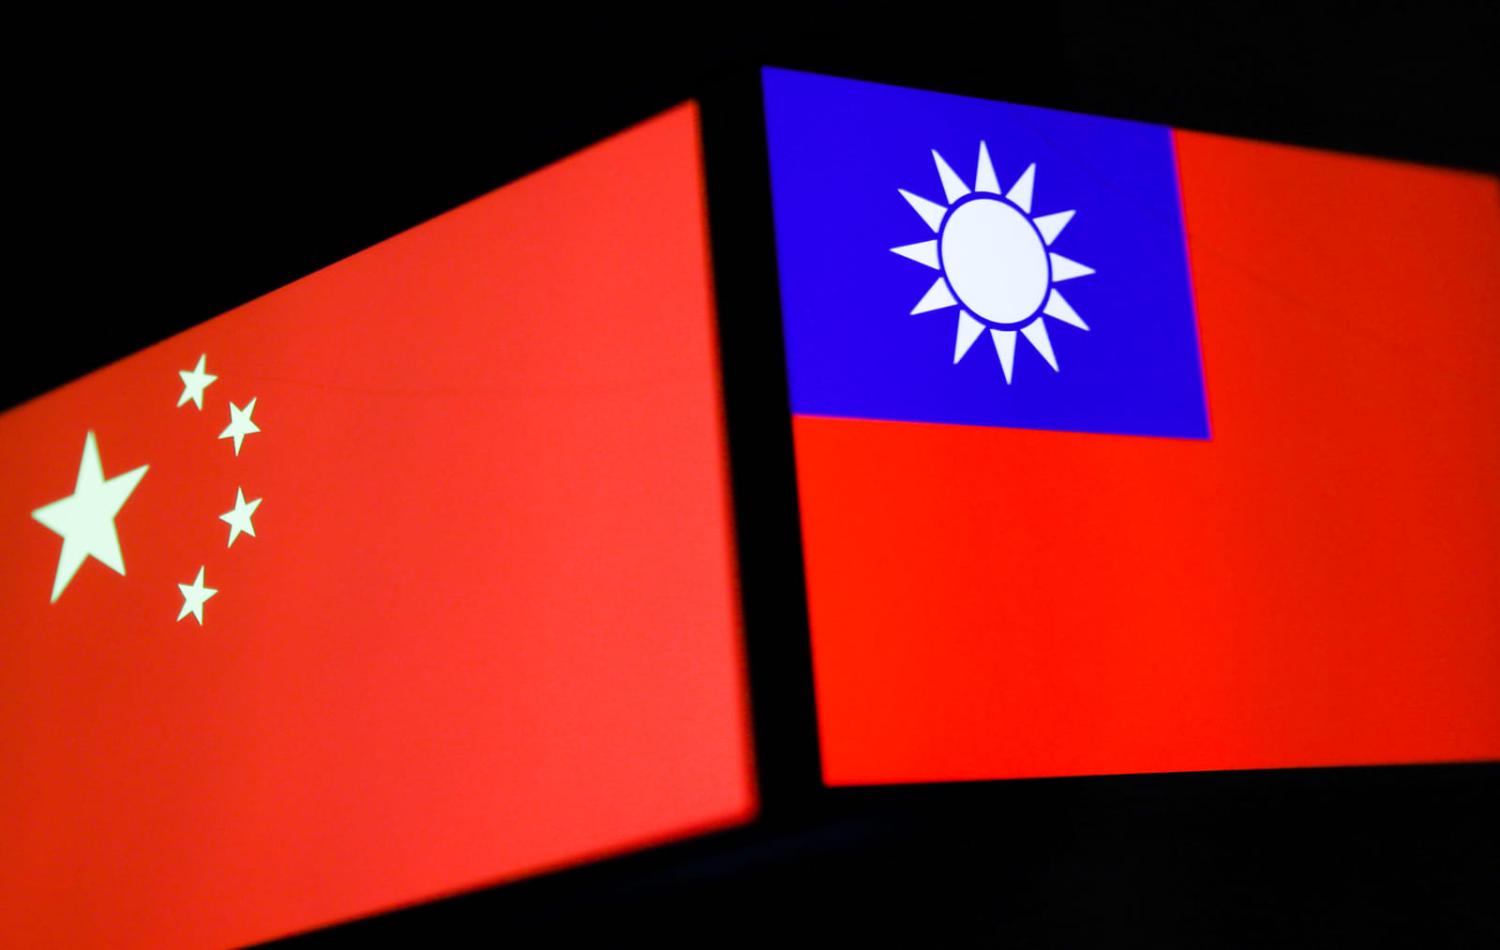 A major shift in tone regarding the ideological nature is hard to overlook in the latest white paper China has issued on Taiwan (Jakub Porzycki/NurPhoto via Getty Images)